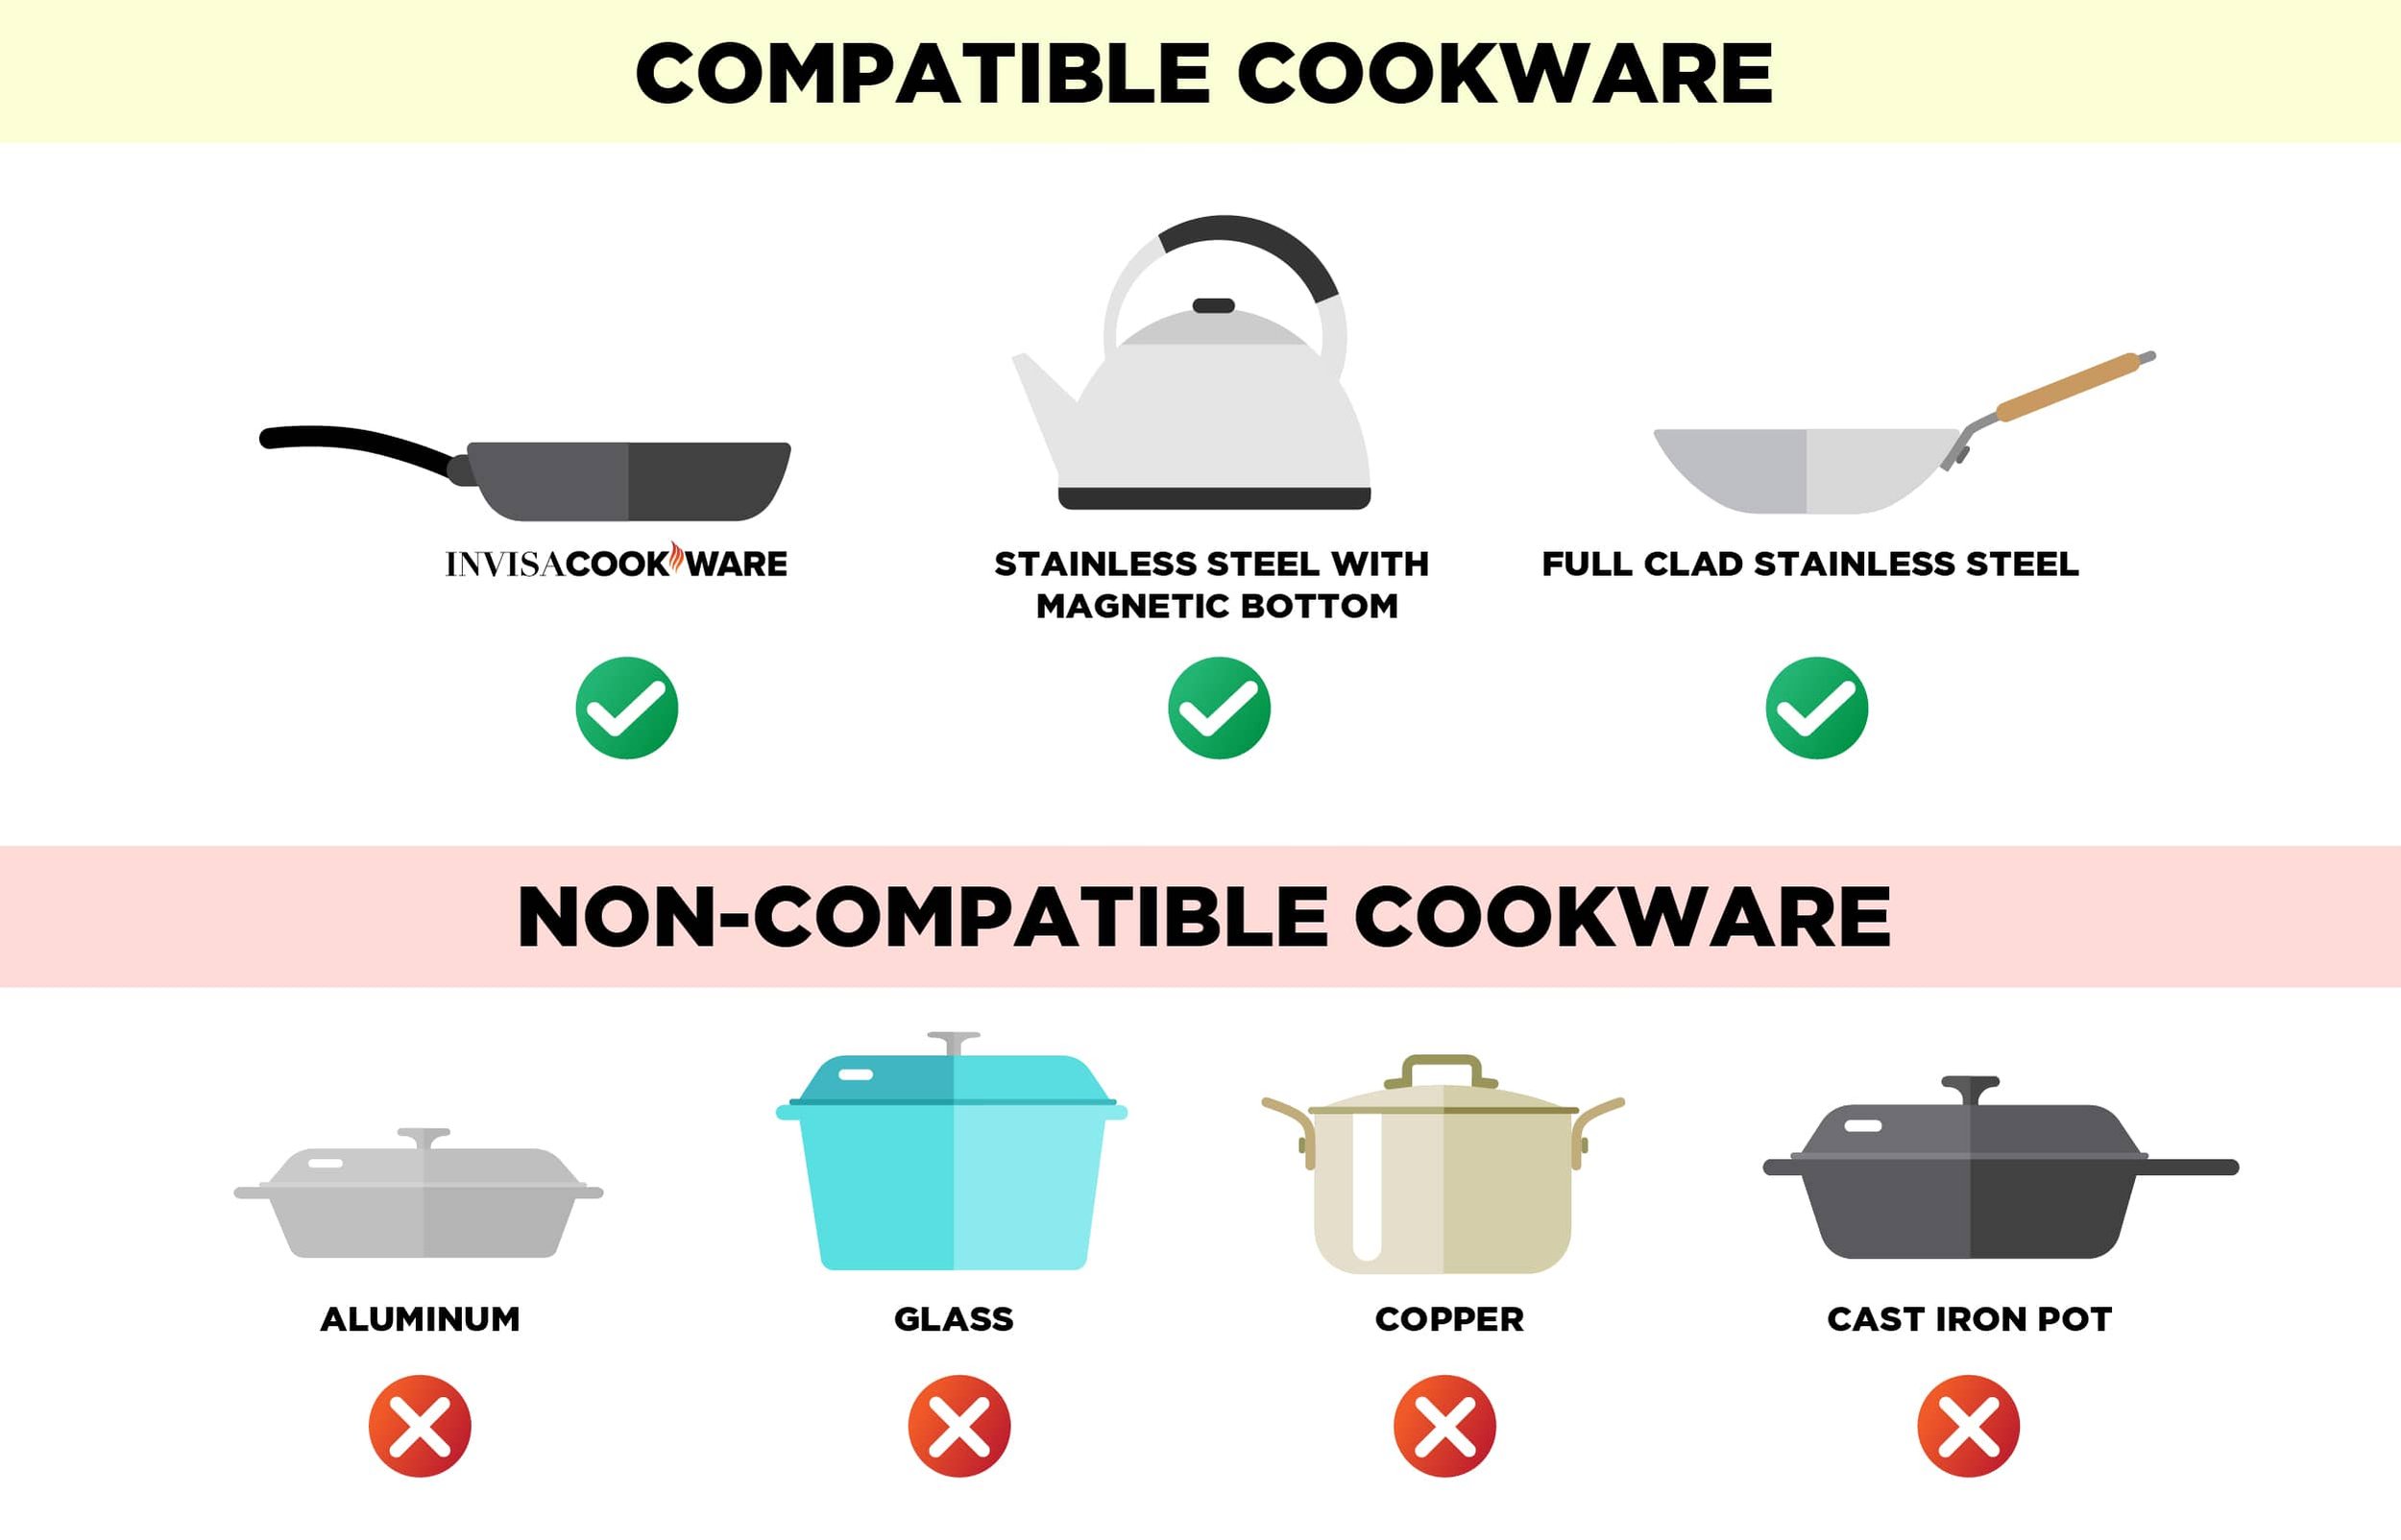 Cookware for Invisacook